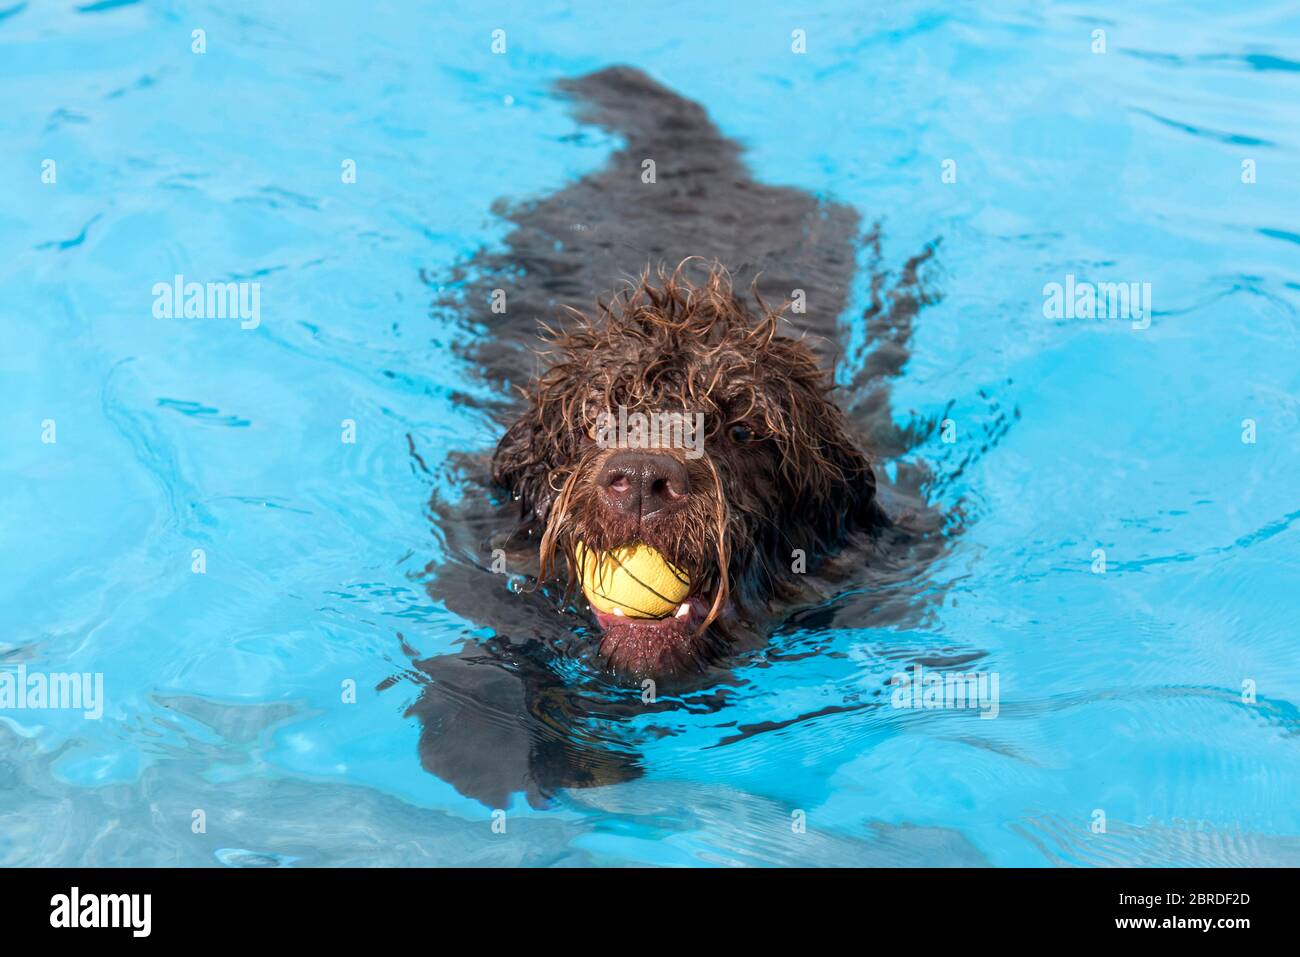 Dogs play with balls and swim in the outdoor swimming pool at the Saltdean Lido which allowed canine guests. Stock Photo